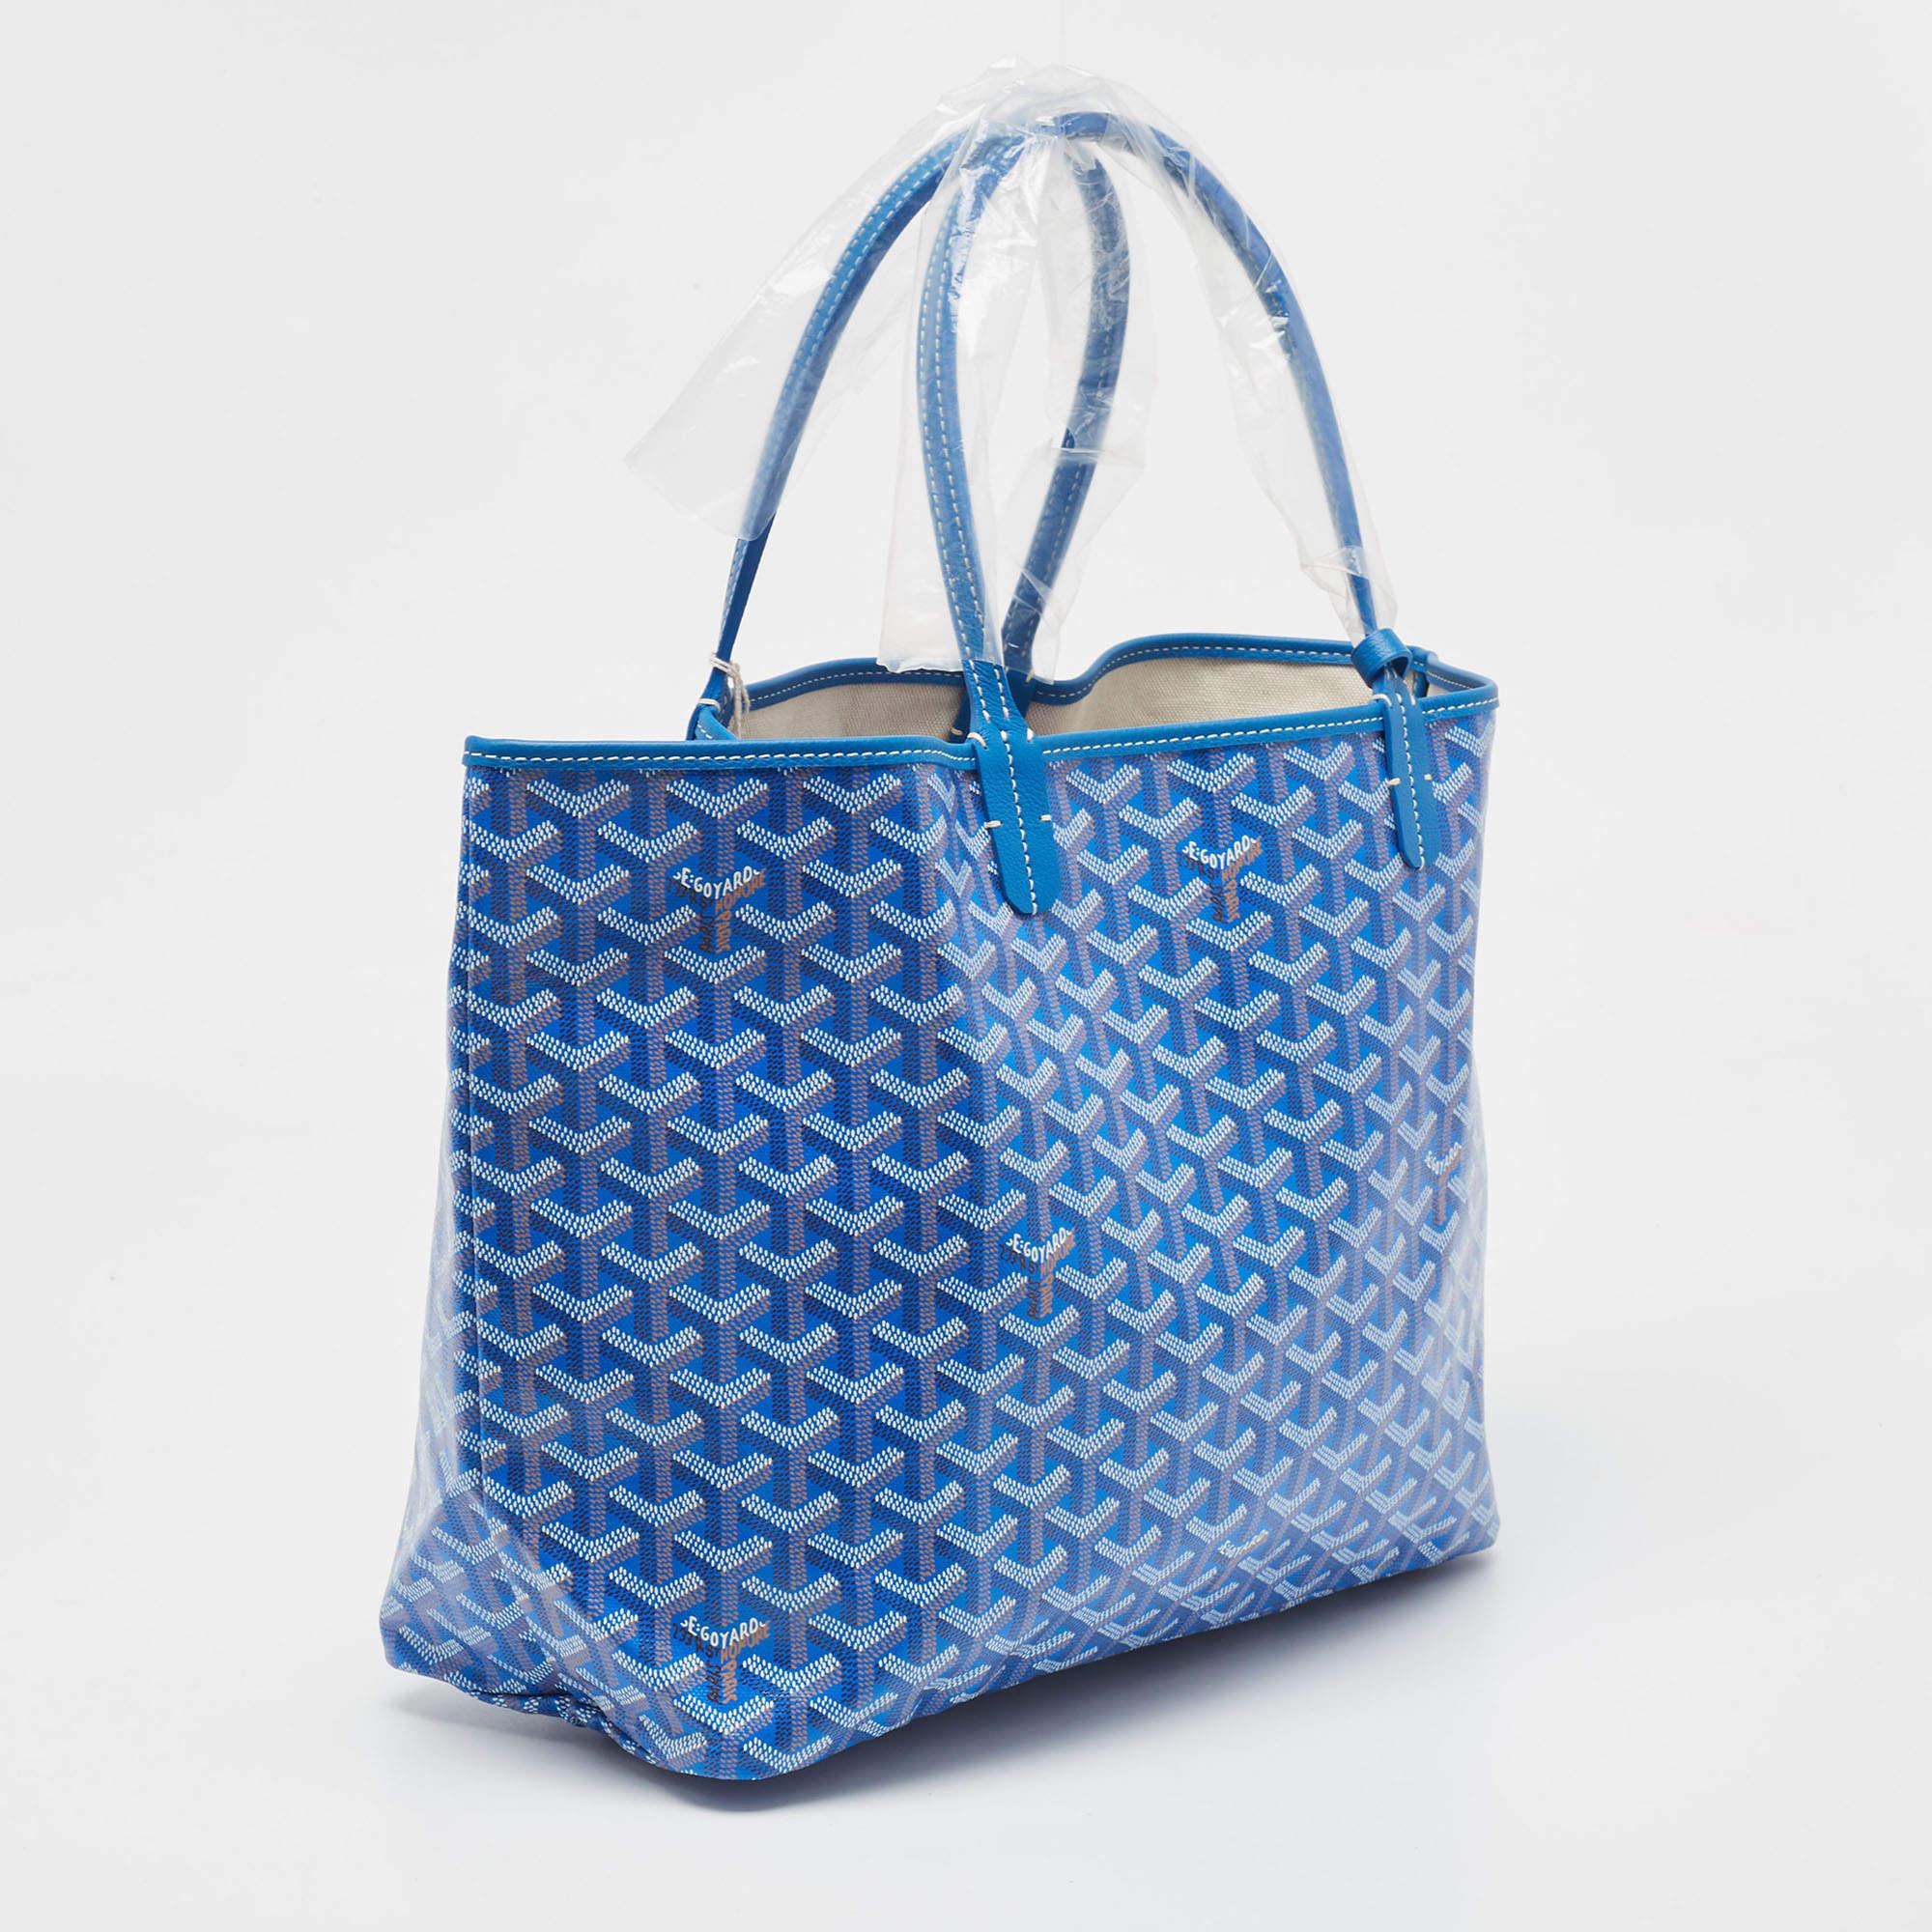 Carry everything you need in style thanks to this Goyard tote. Crafted from the best materials, this is an accessory that promises enduring style and usage.

